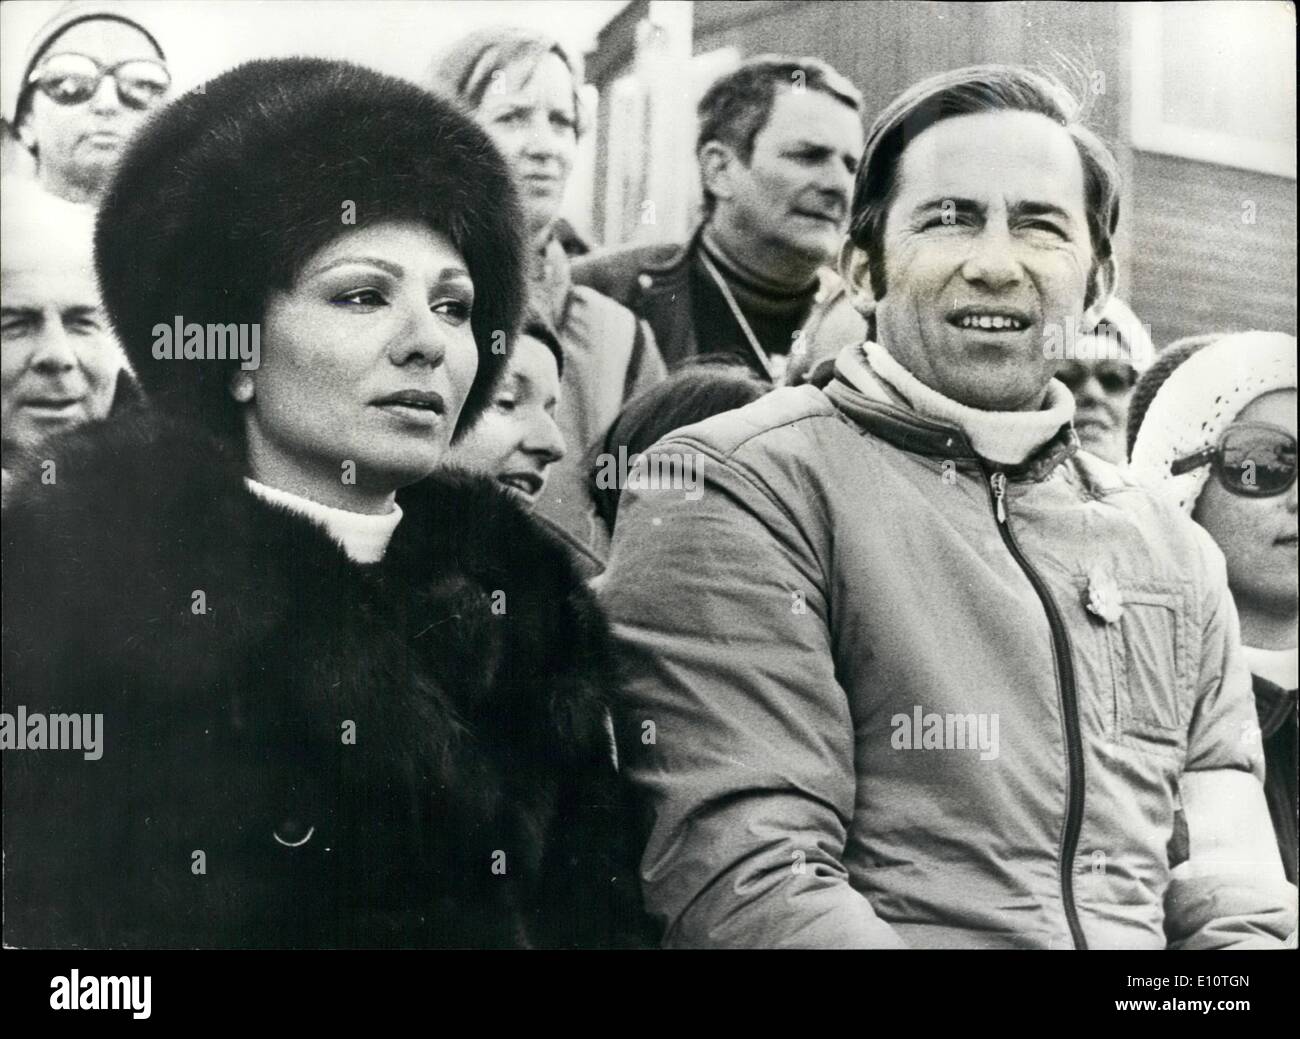 Feb. 02, 1974 - Sable Fur for Farah Diba.: Among the prominent spectators at the Alpine Ski World Championships in St. Moritz, were Empress Farah Diba of Iran, in sable fur coat and matching hat, and the exiled Ex-King Constantine of Greece. Stock Photo